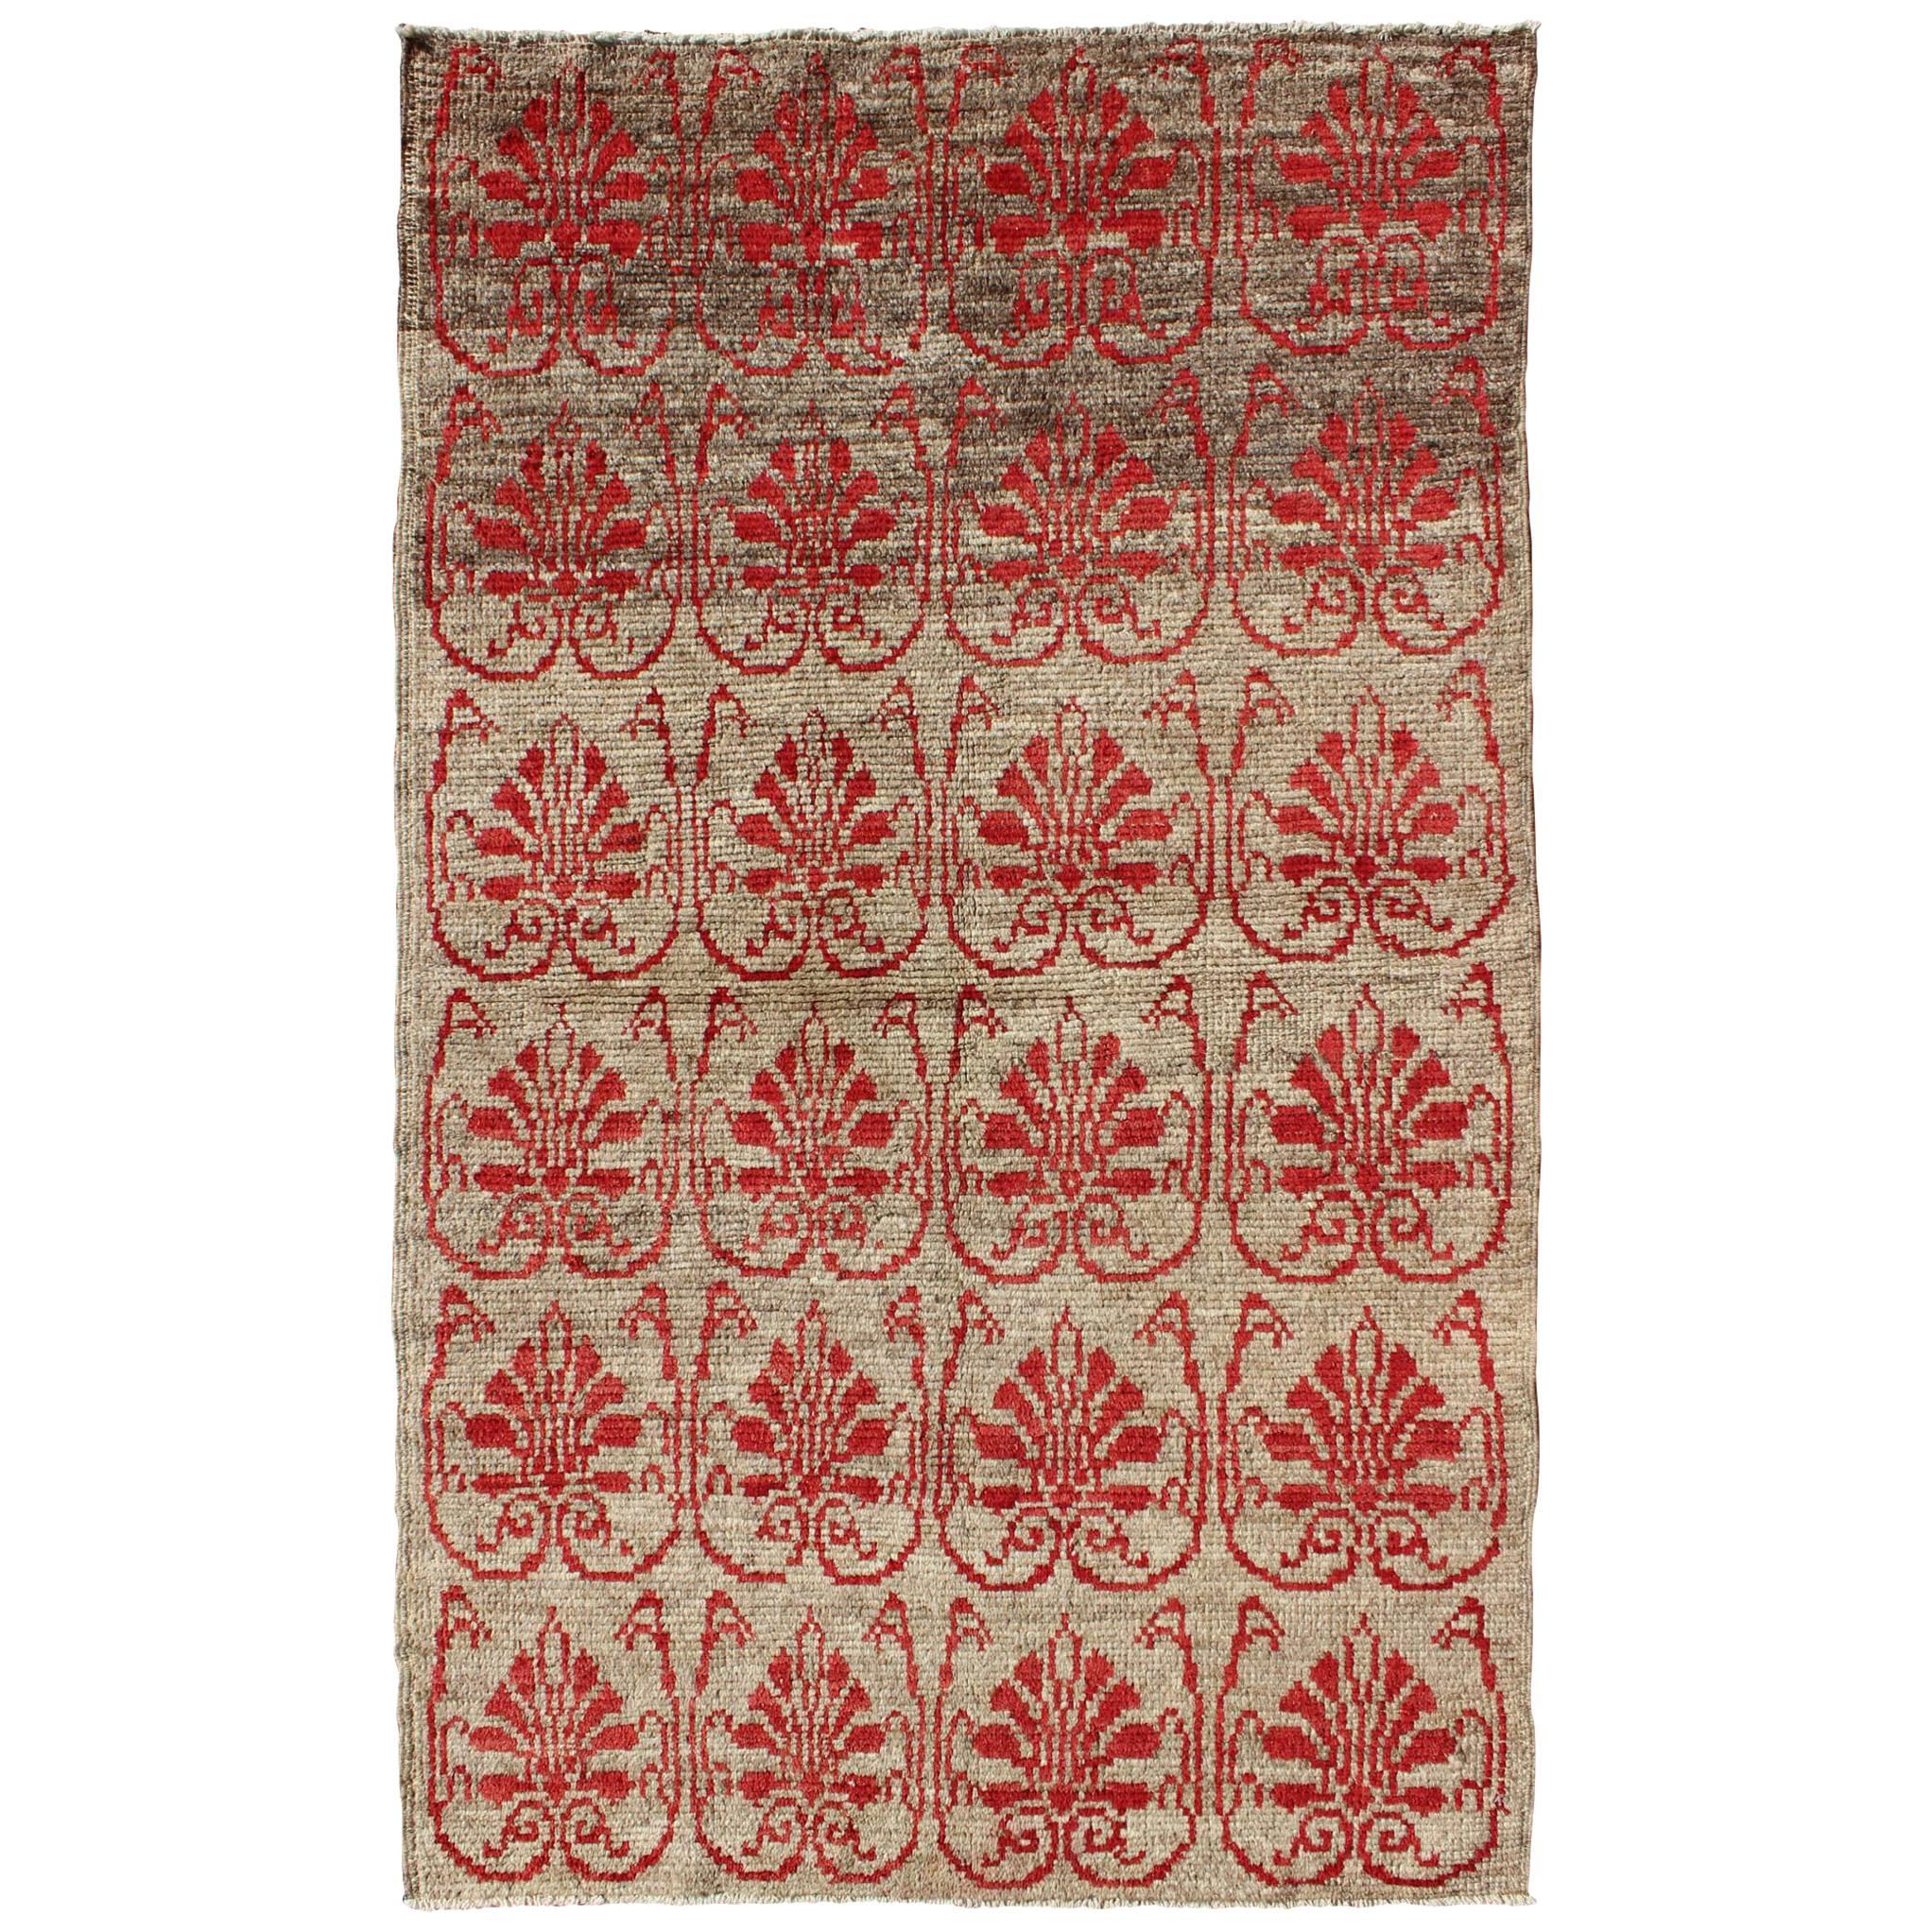  Vintage Turkish Tulu Carpet with Repeating Red Boteh & Light Green Field